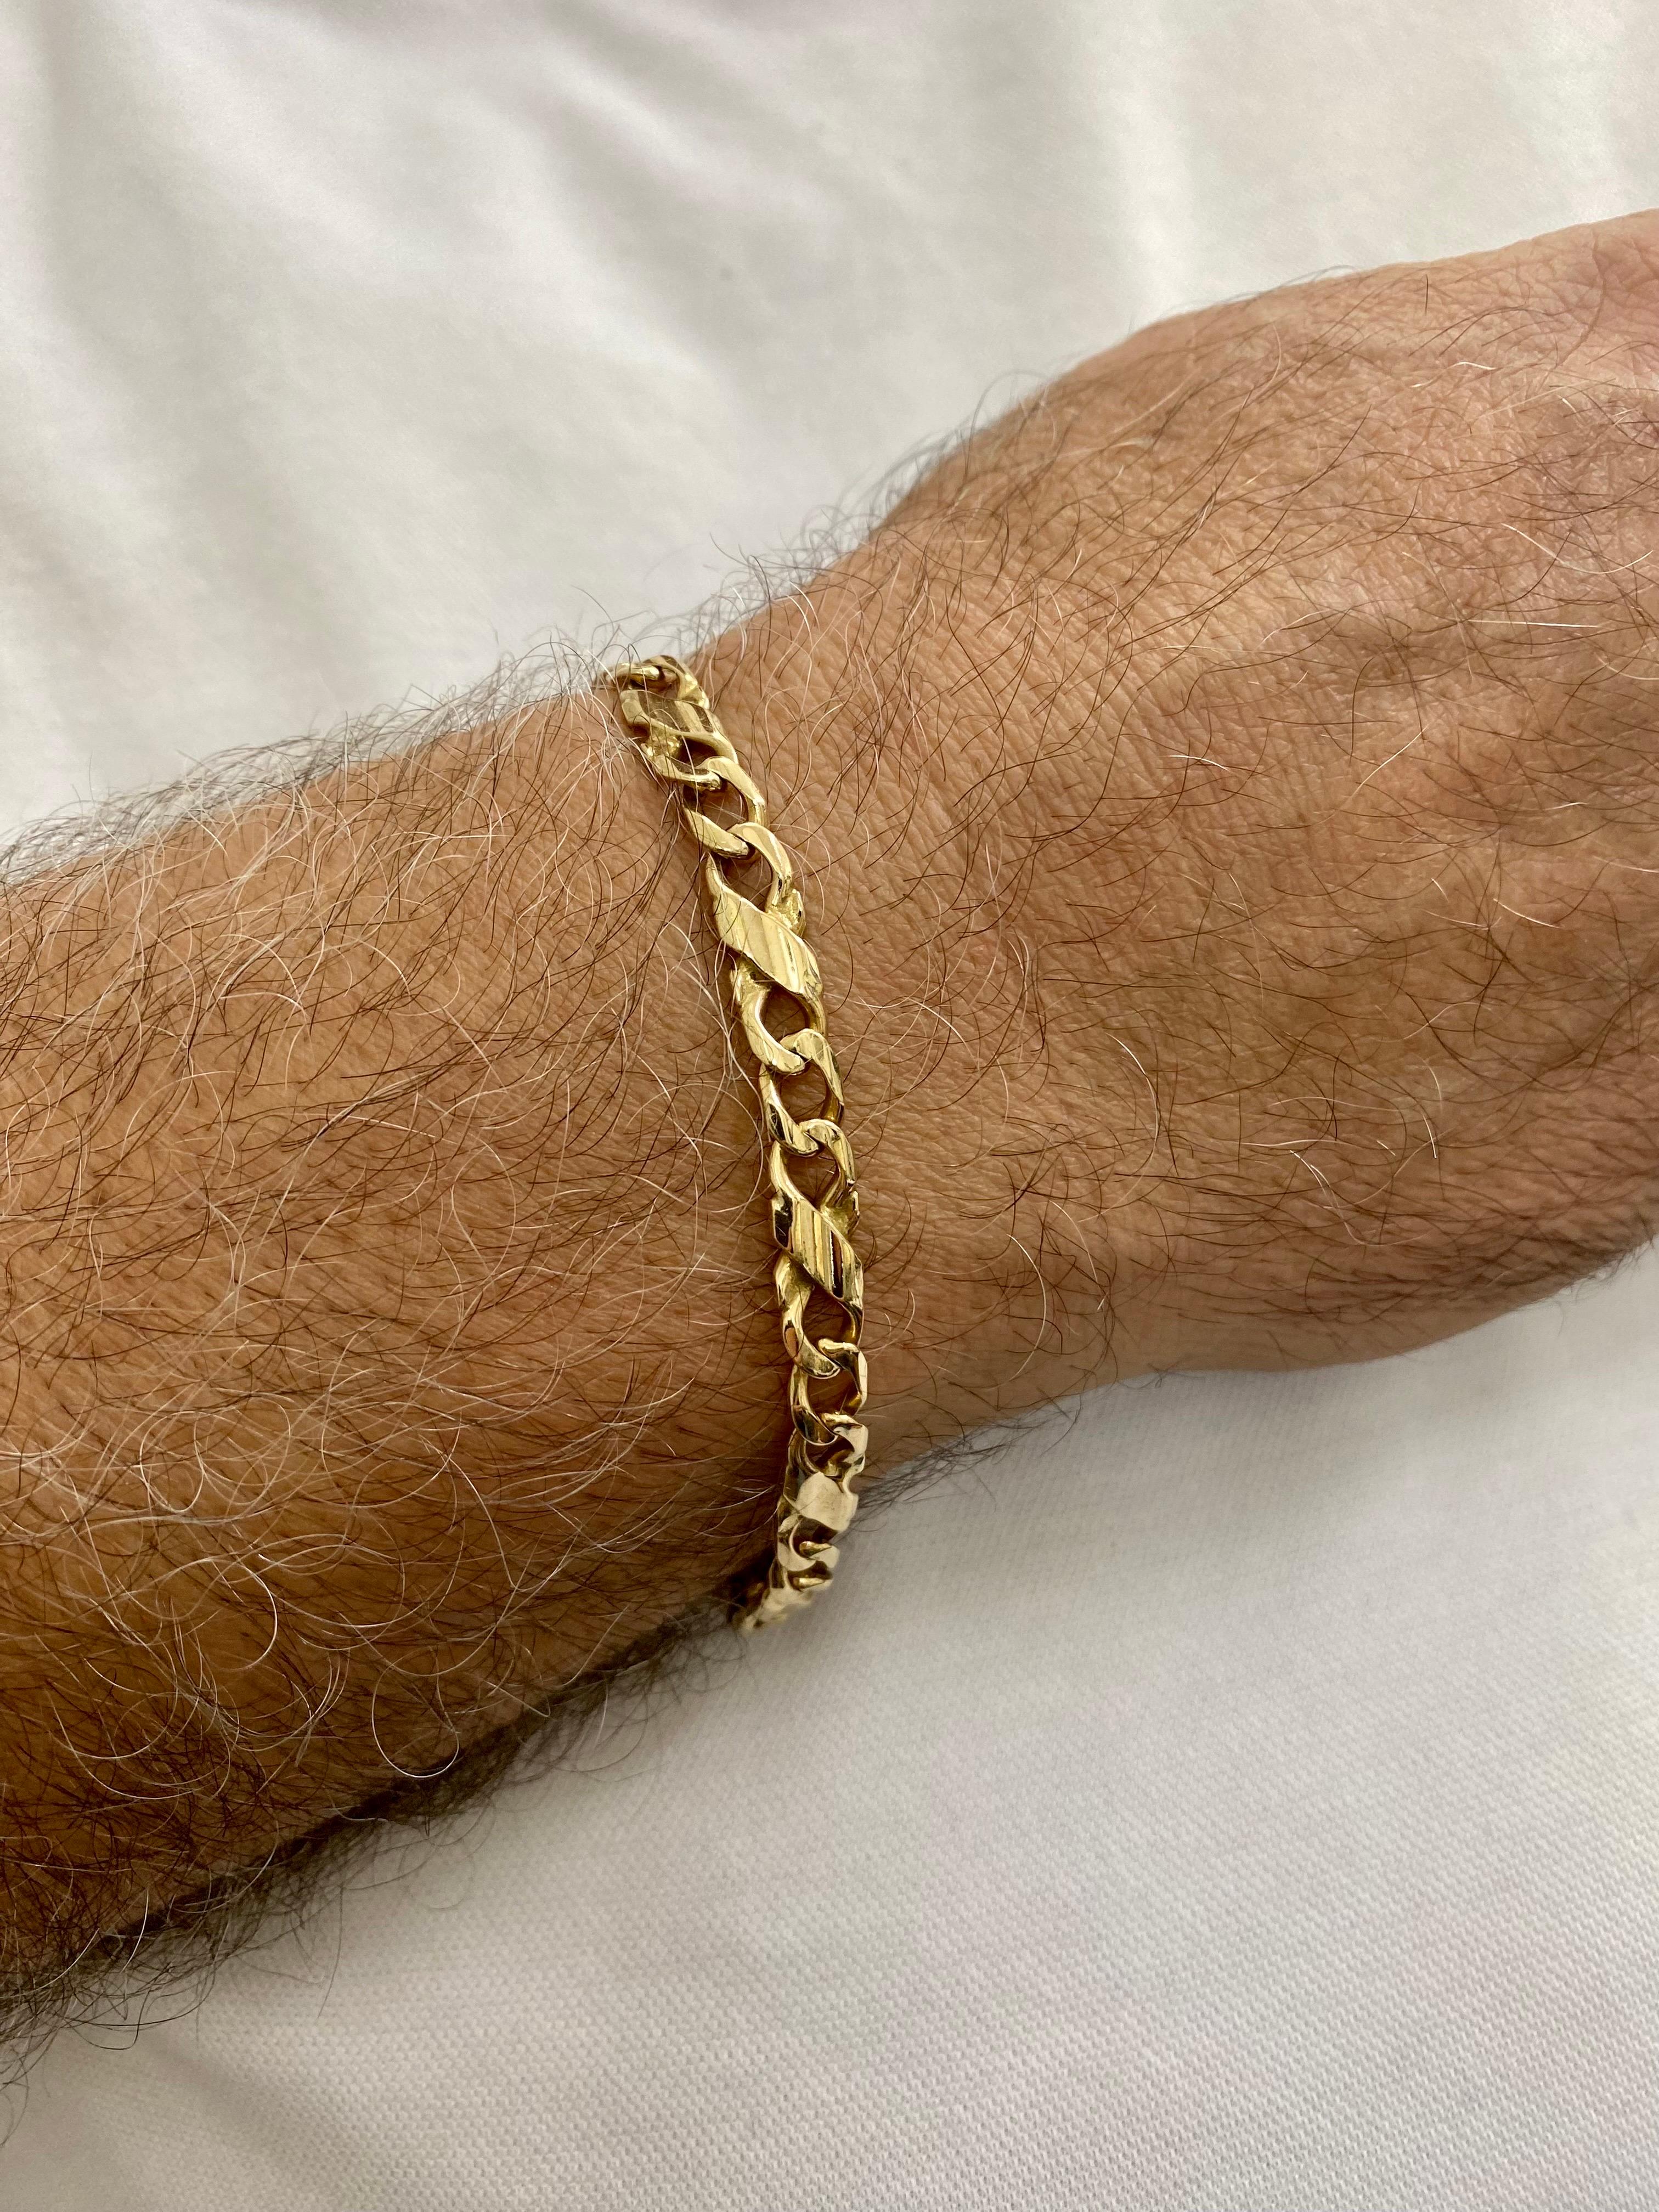 Vintage Men’s 6.5mm Fancy Extended Twist Cuban Curb Link Bracelet 14k Gold. Very rare Bracelet made in Italy. The bracelet weights 19.8g and is 8 inches long.